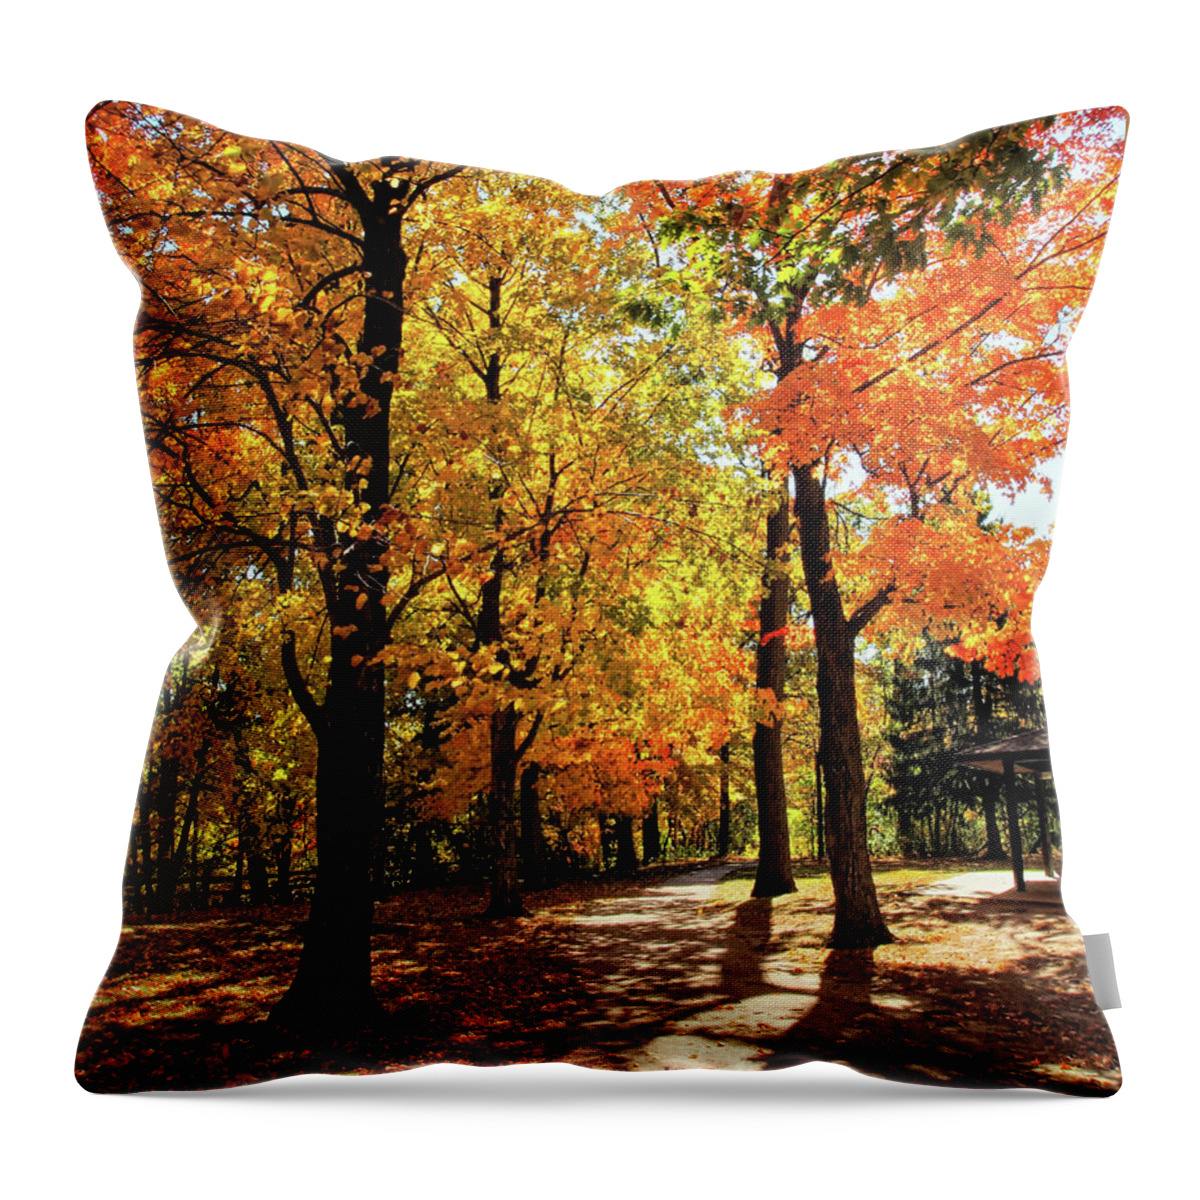 Fall Throw Pillow featuring the photograph Fall Walkway by Scott Olsen